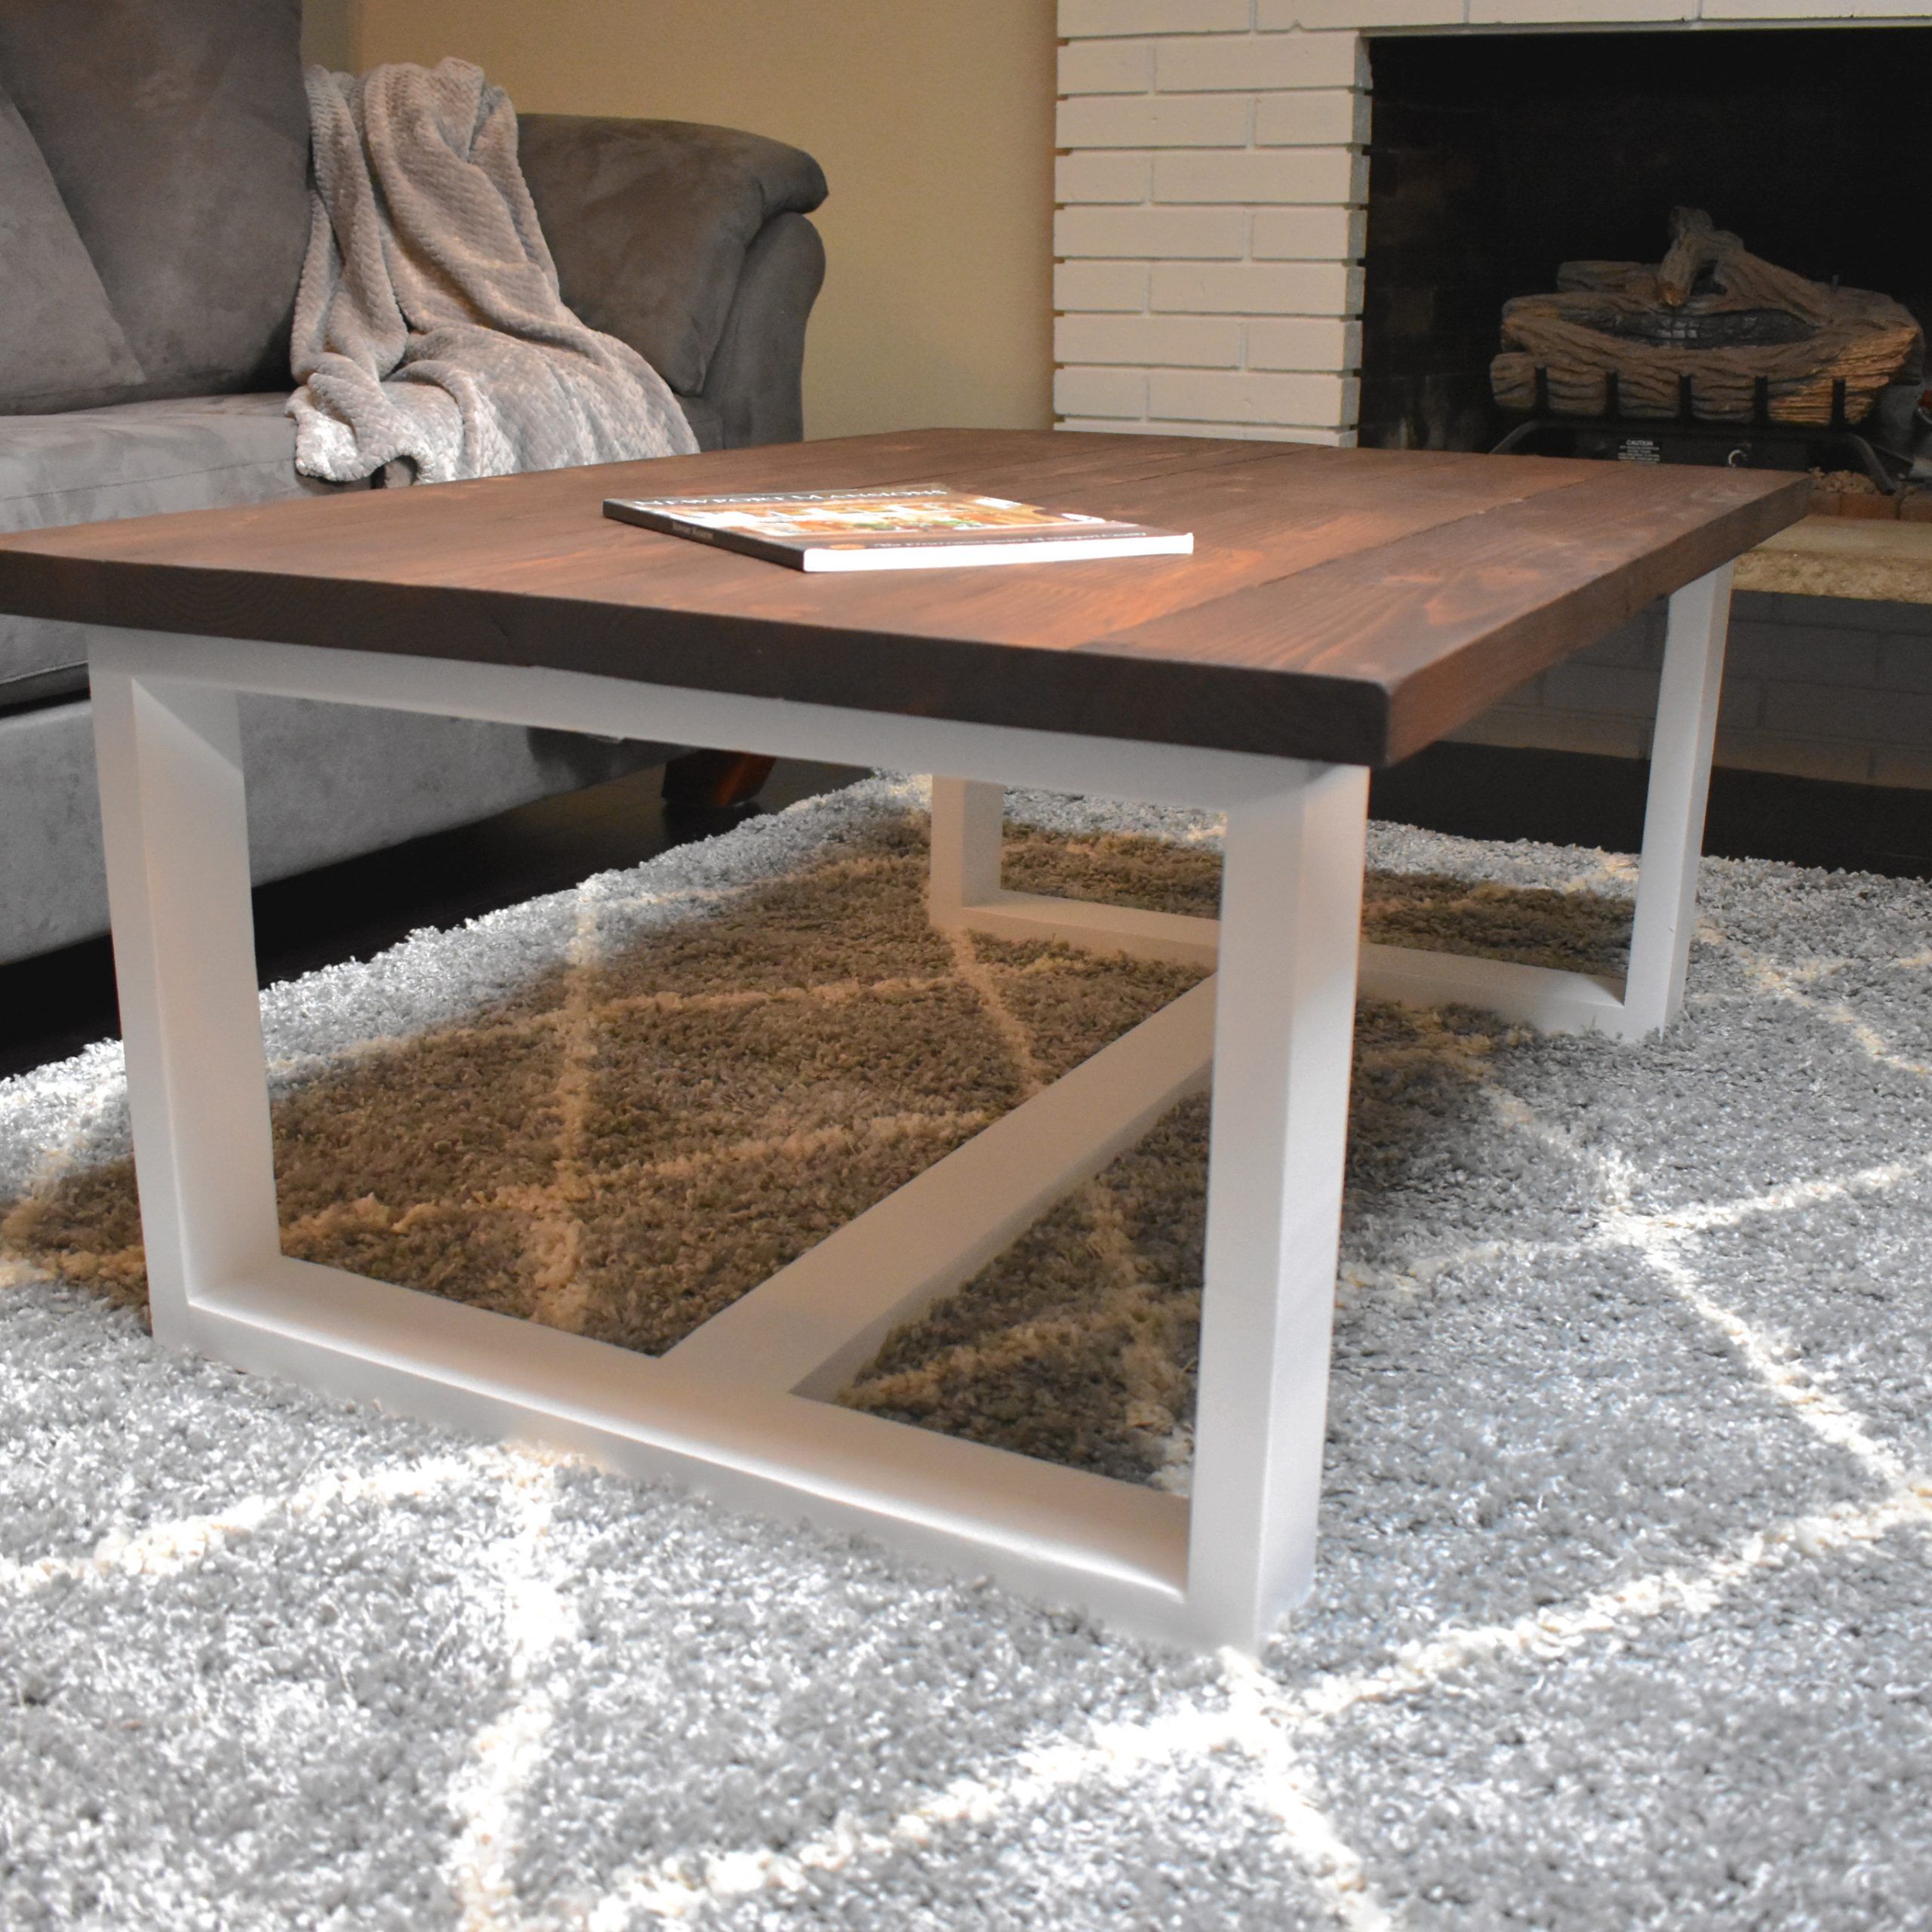 Diy Modern Farmhouse Coffee Table – The Crafted Maker For Modern Farmhouse Coffee Tables (View 7 of 15)